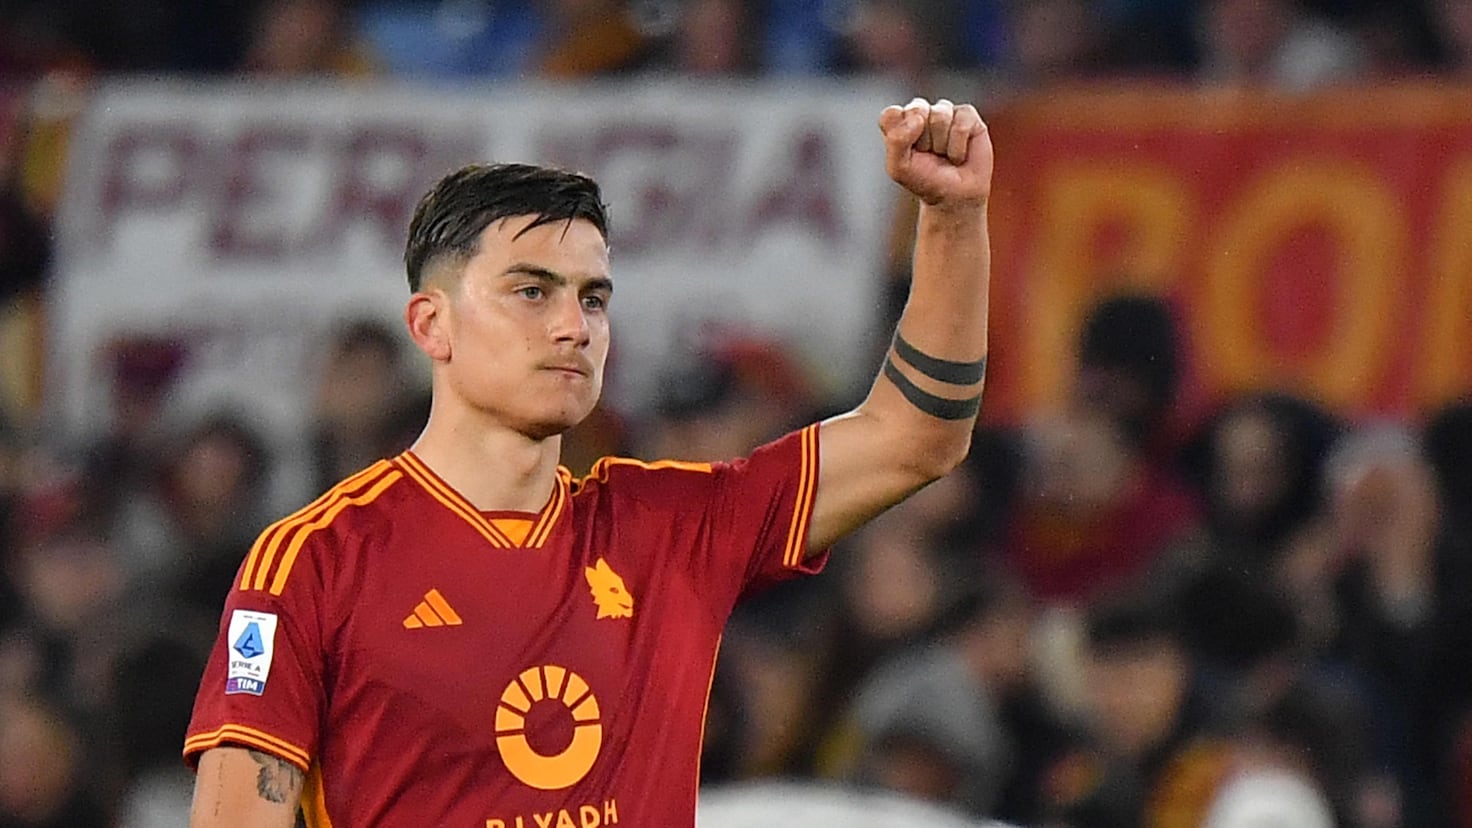 Dybala and Wirtz: The Driving Forces Behind Roma and Leverkusen's Triumphs